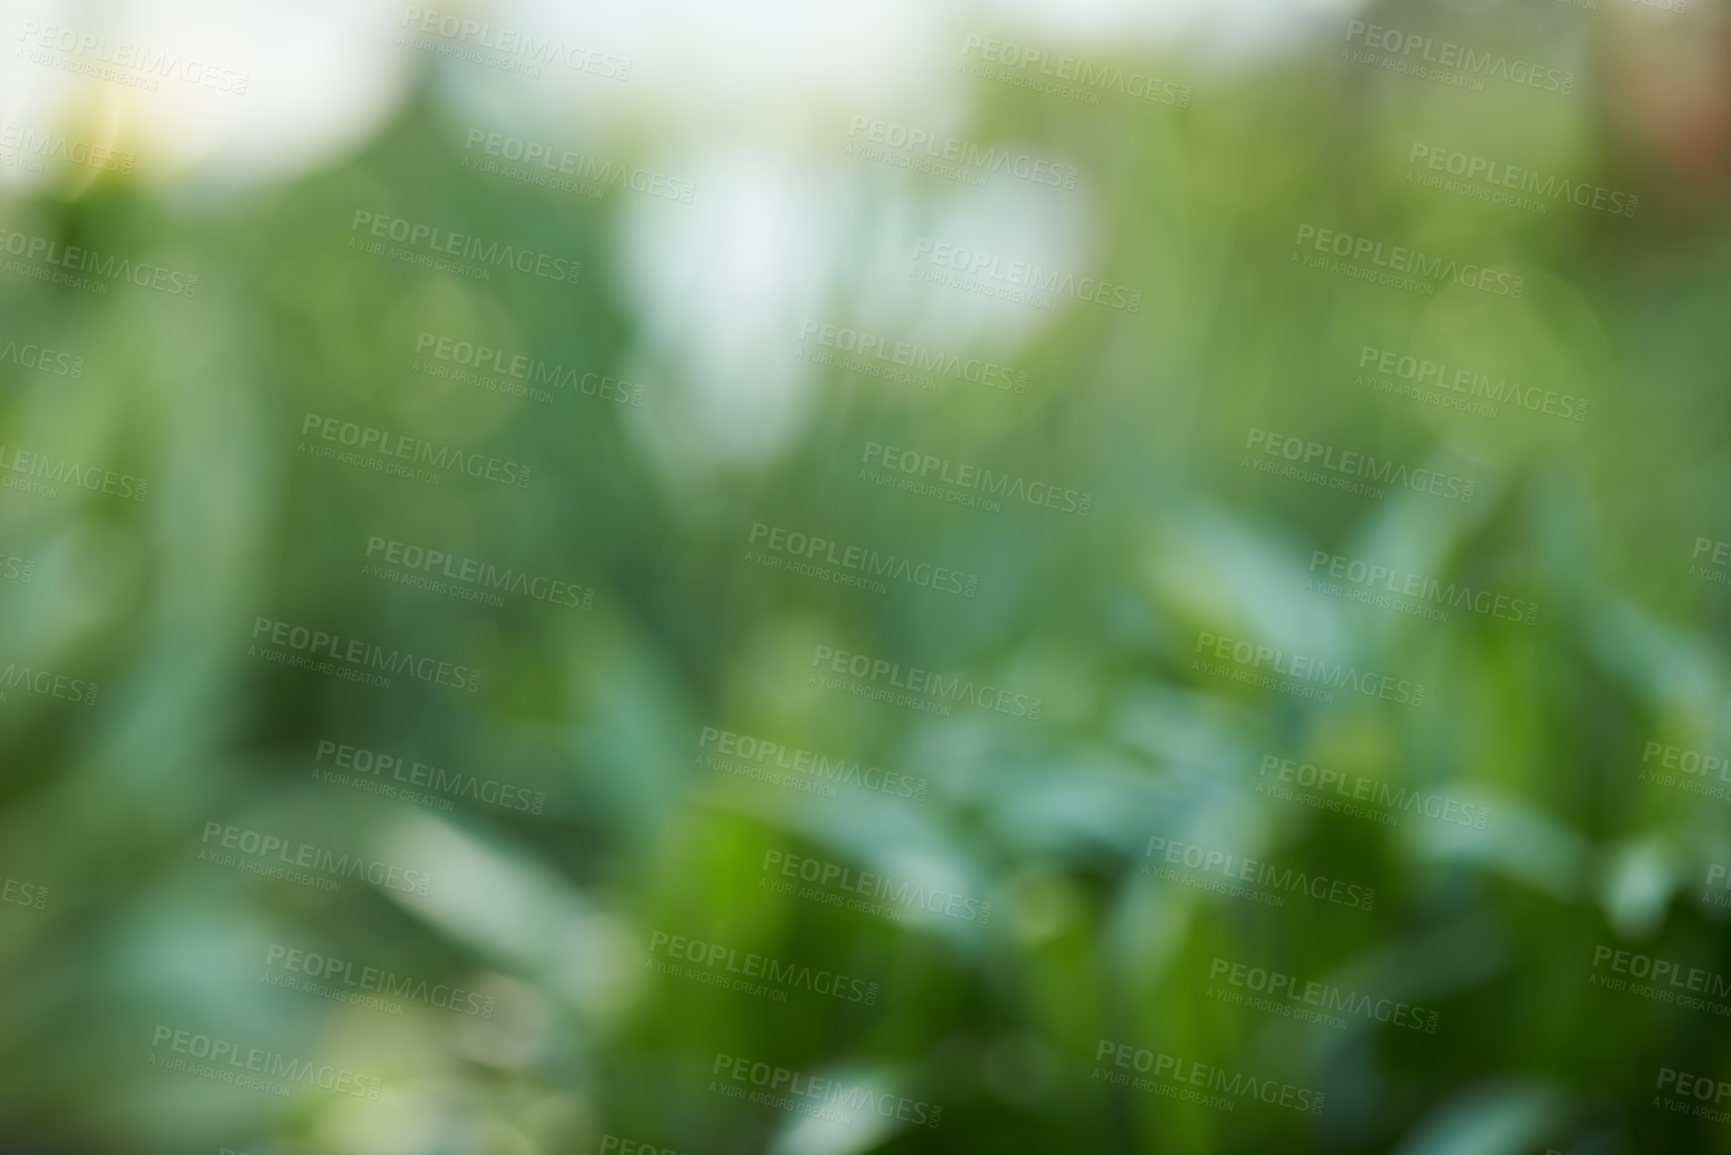 Buy stock photo Green grass outdoors on a lawn in the backyard of a home. Beautiful lush pasture outside on field on a summer day. Blurred meadow or plant background in nature with copy space on a spring afternoon